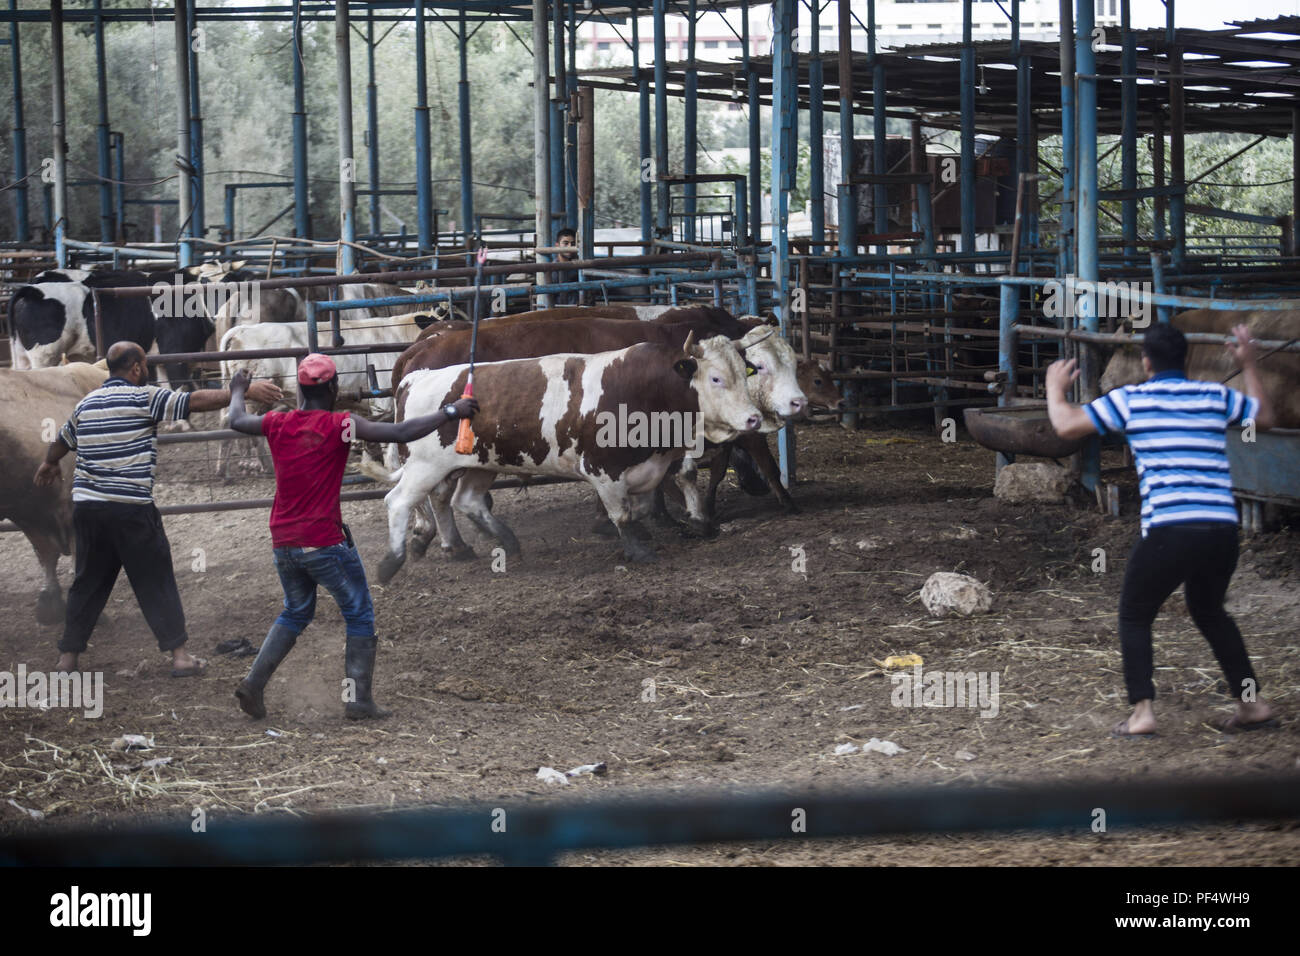 Gaza City, The Gaza Strip, Gaza. 18th Aug, 2018. Farmers seen with the bulls at the cattle shop.Palestinians gather in a cattle shop to purchase cattles to be sacrificed. before Eid al-Adha in the east of Jabalya refugee camp. Eid al-Adha (Festival of Sacrifice) is celebrated throughout the Islamic world as the commemoration of Abraham's will to sacrifice his son for God, cows, camels, goats and sheep are traditionally slaughtered on the Holy Day. Credit: Mahmoud Issa/SOPA Images/ZUMA Wire/Alamy Live News Stock Photo